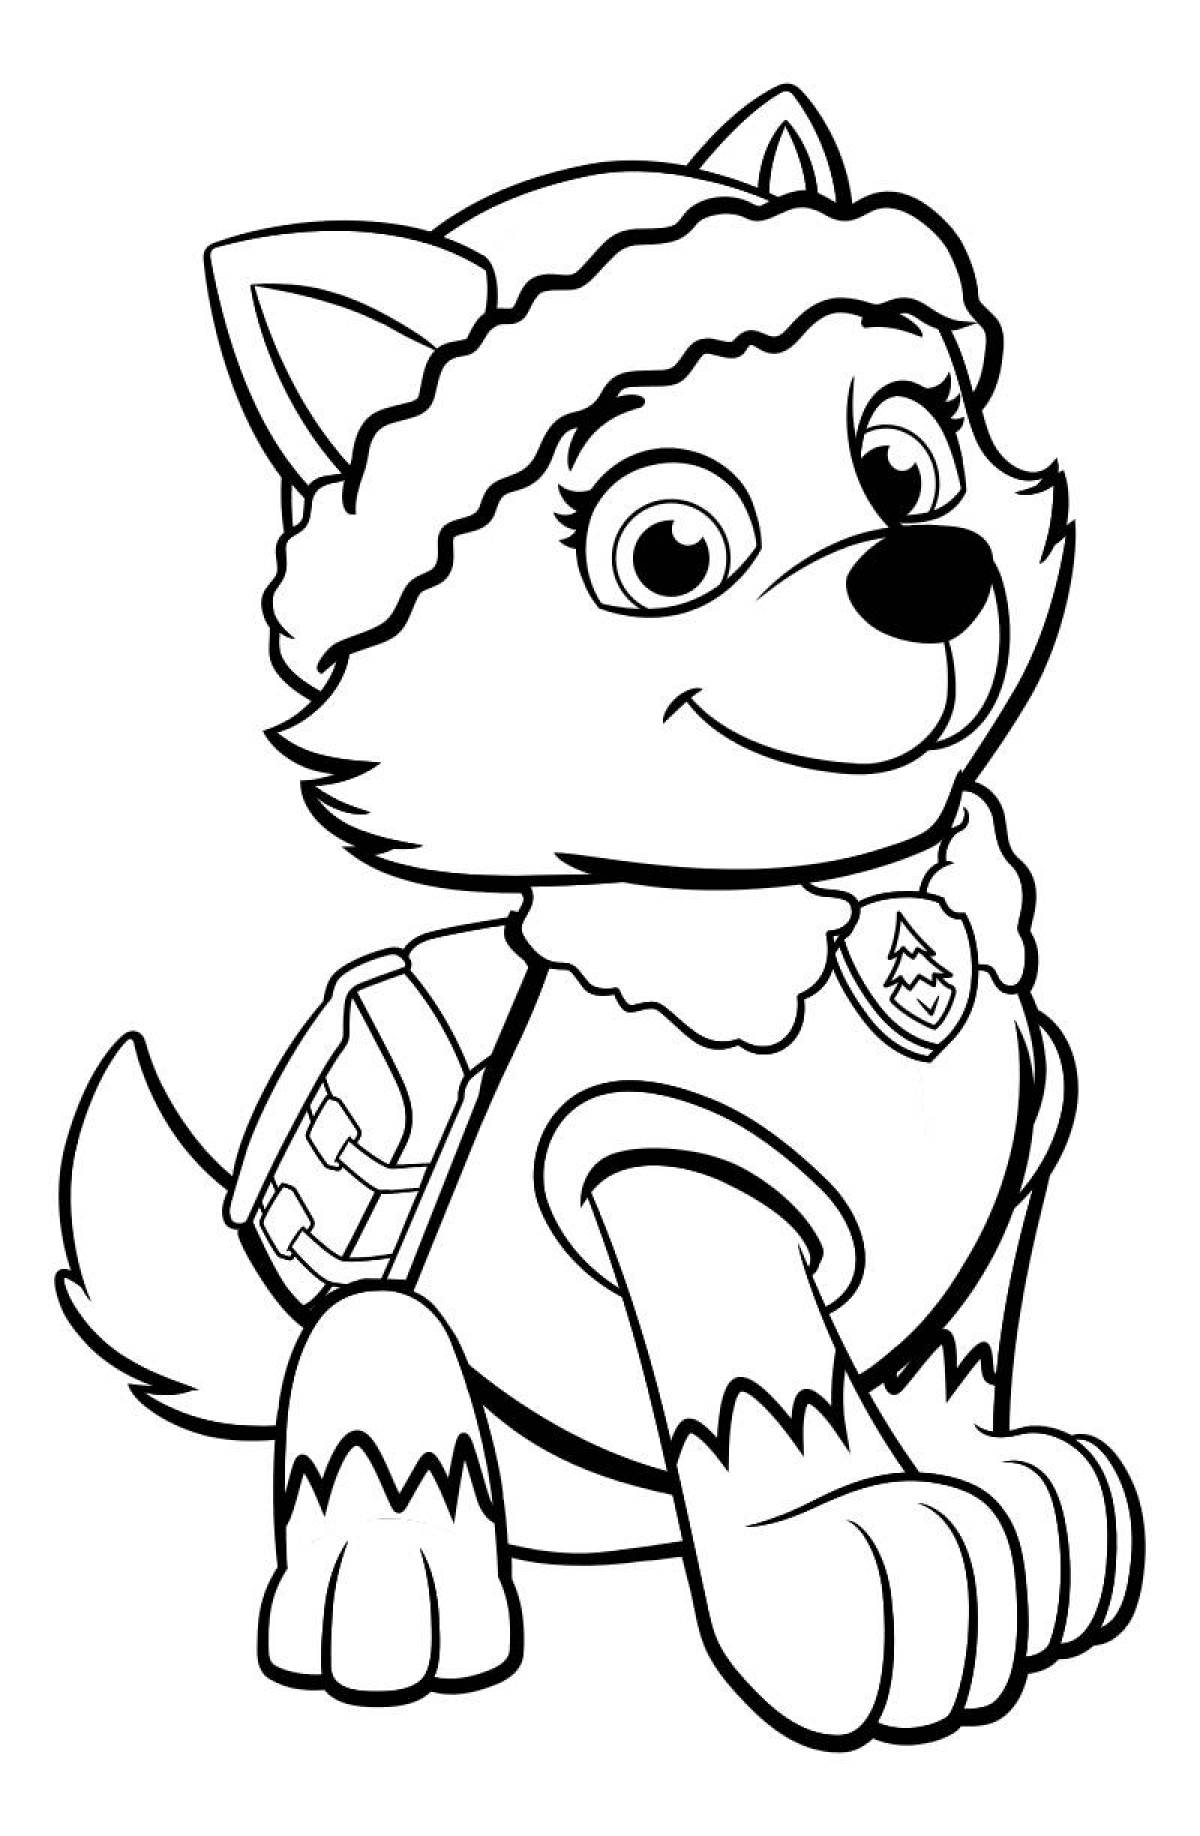 Cozy Paw Patrol coloring pages for kids